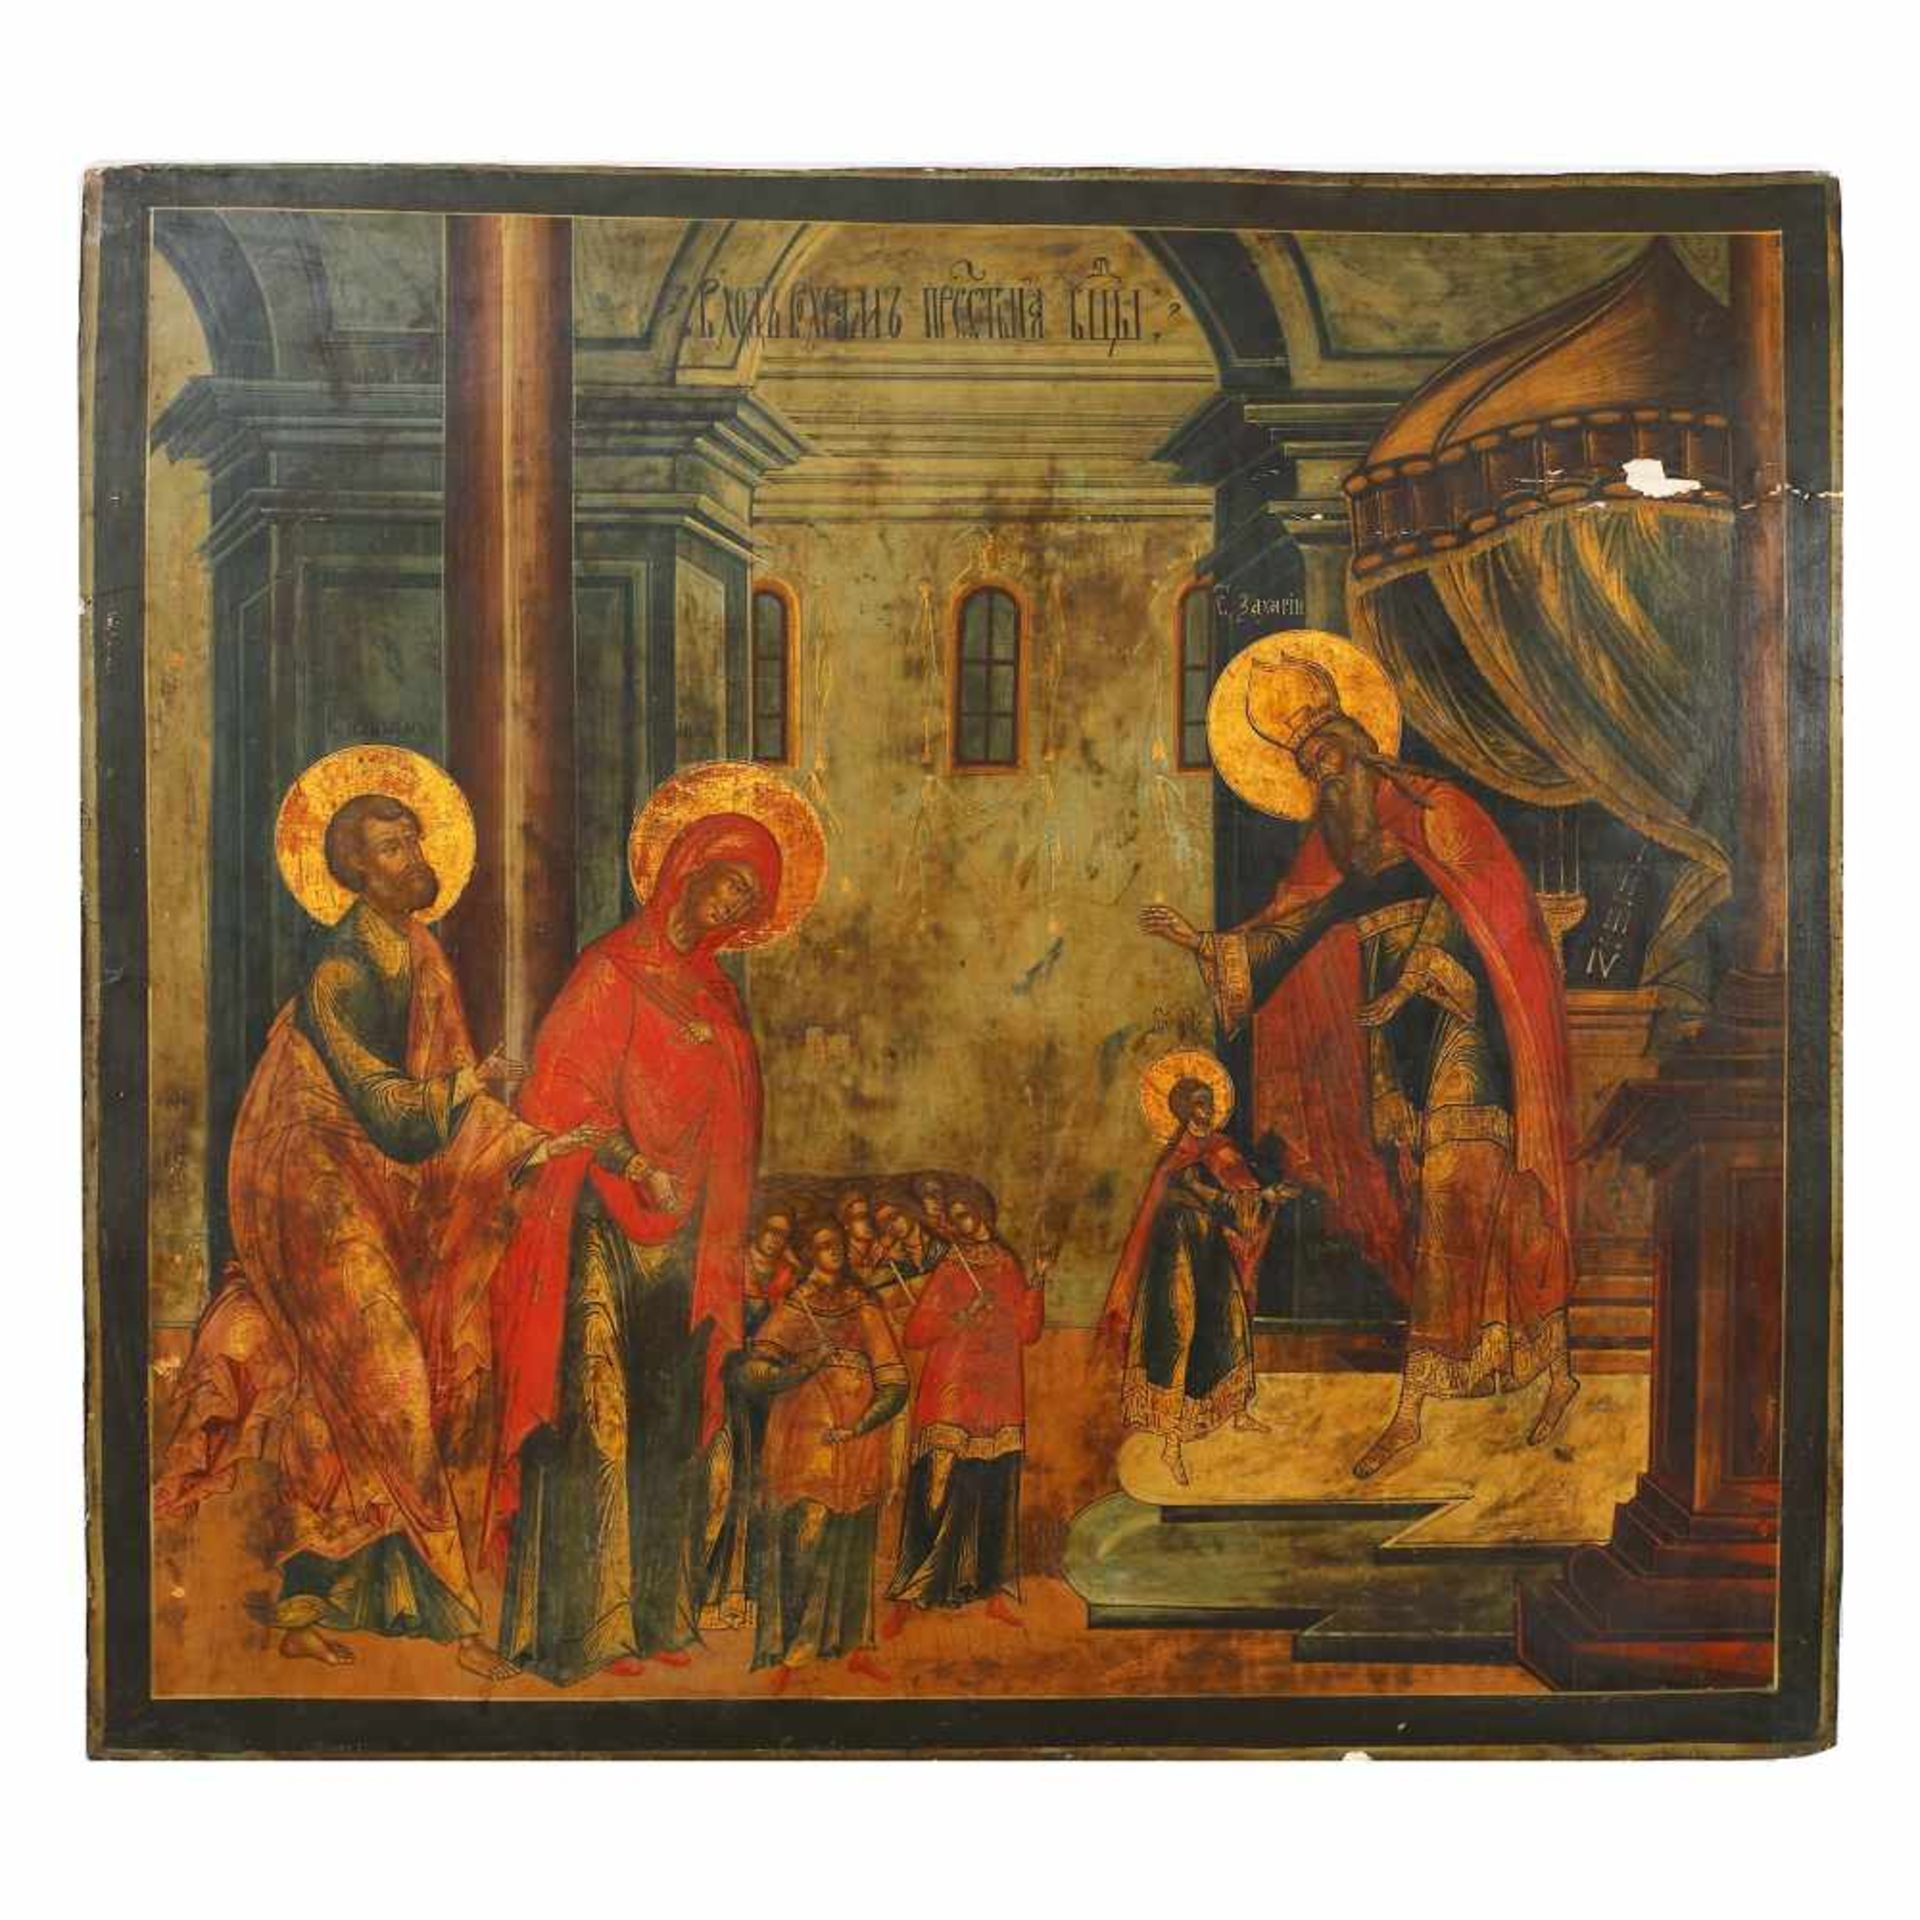 "Presentation at the Temple of the Lord", royal icon on wood, Russian school, mid-18th century